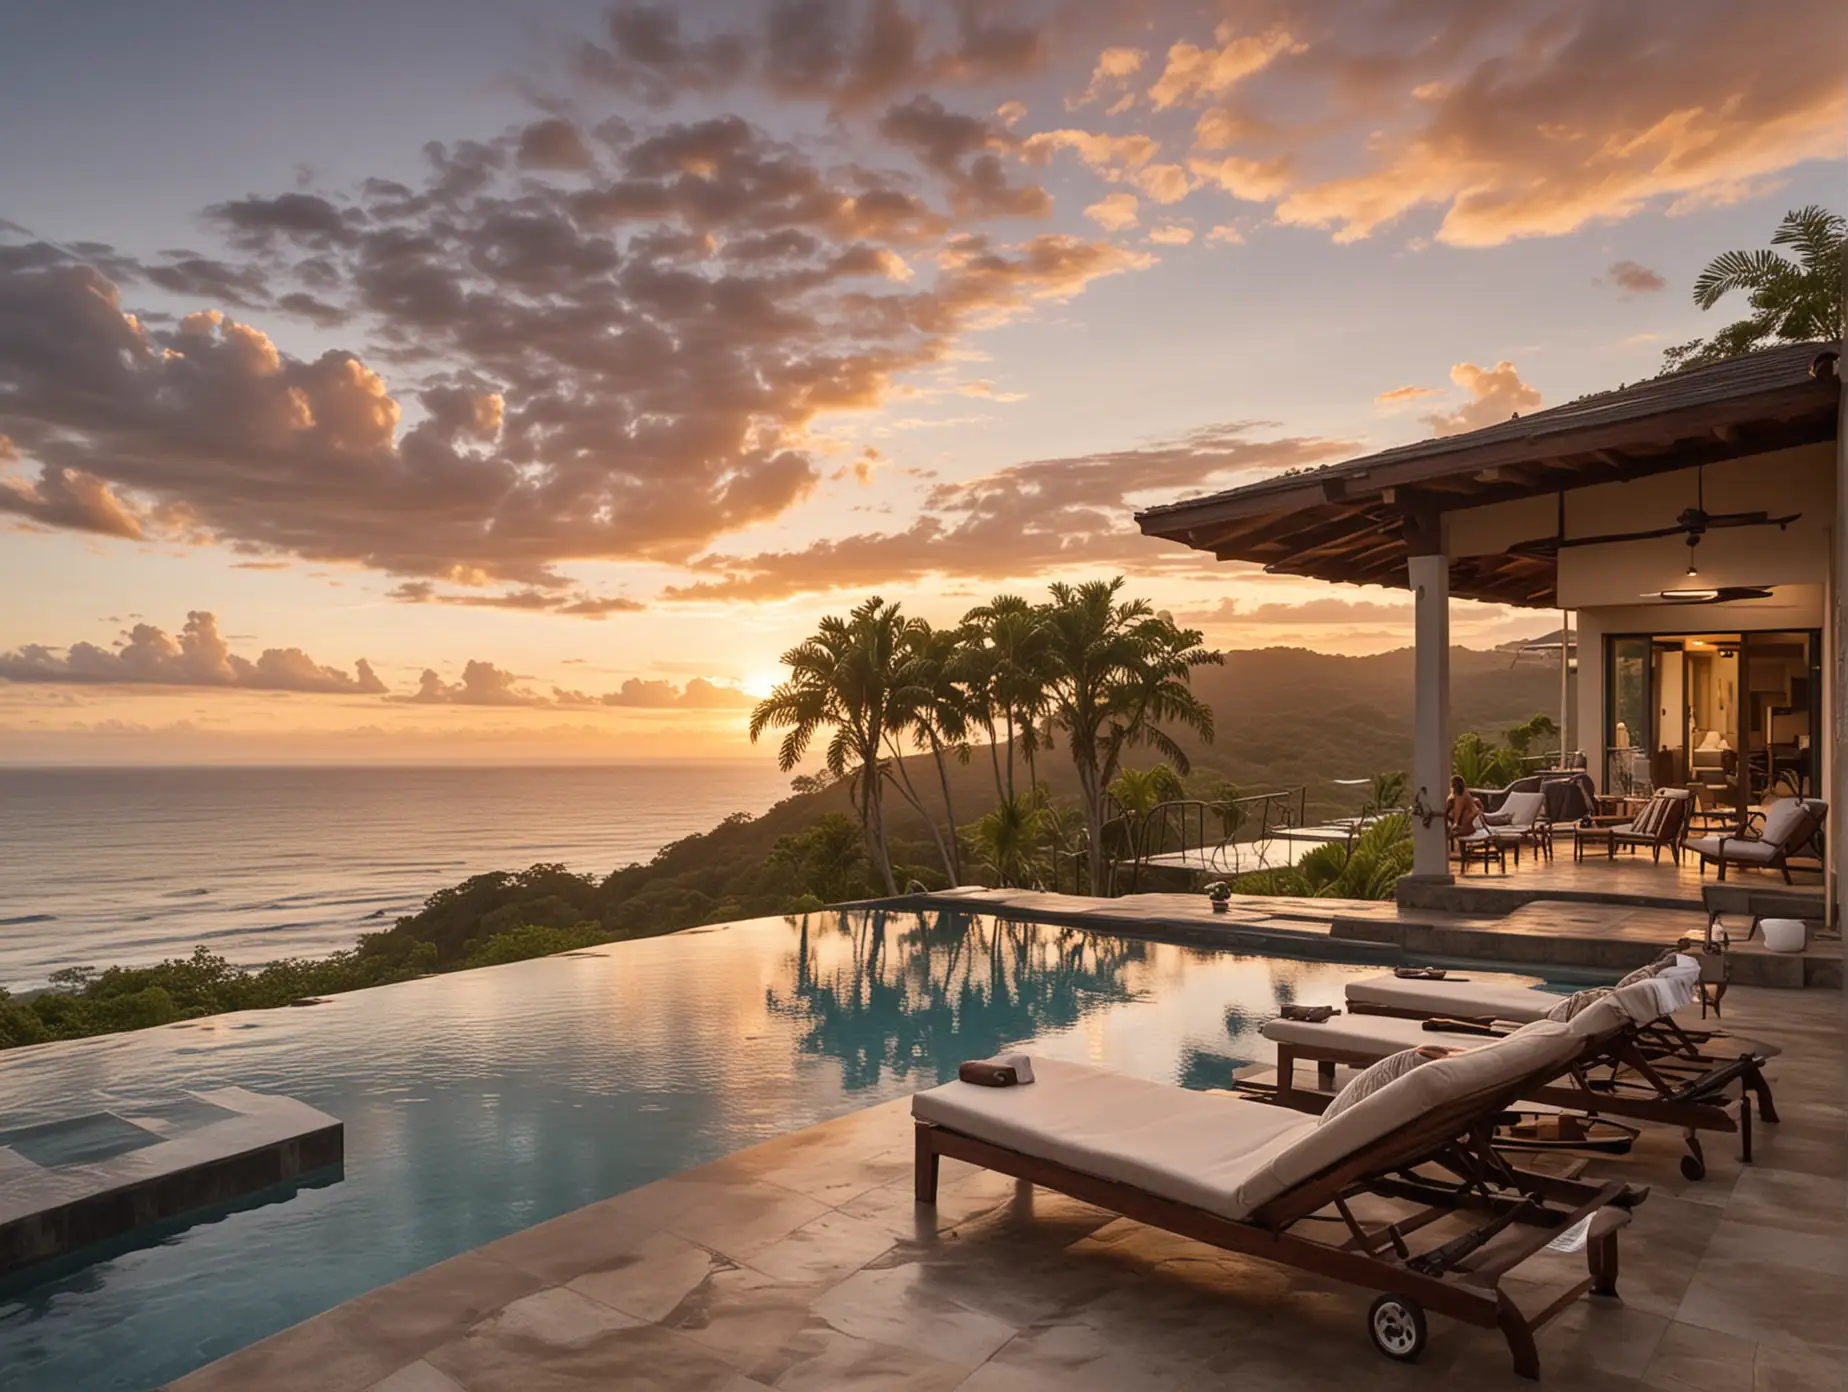 1 story costa rica home with an infinity pool and outdoor living areas with a man and woman sitting in loungers overlooking the ocean at sunrise.